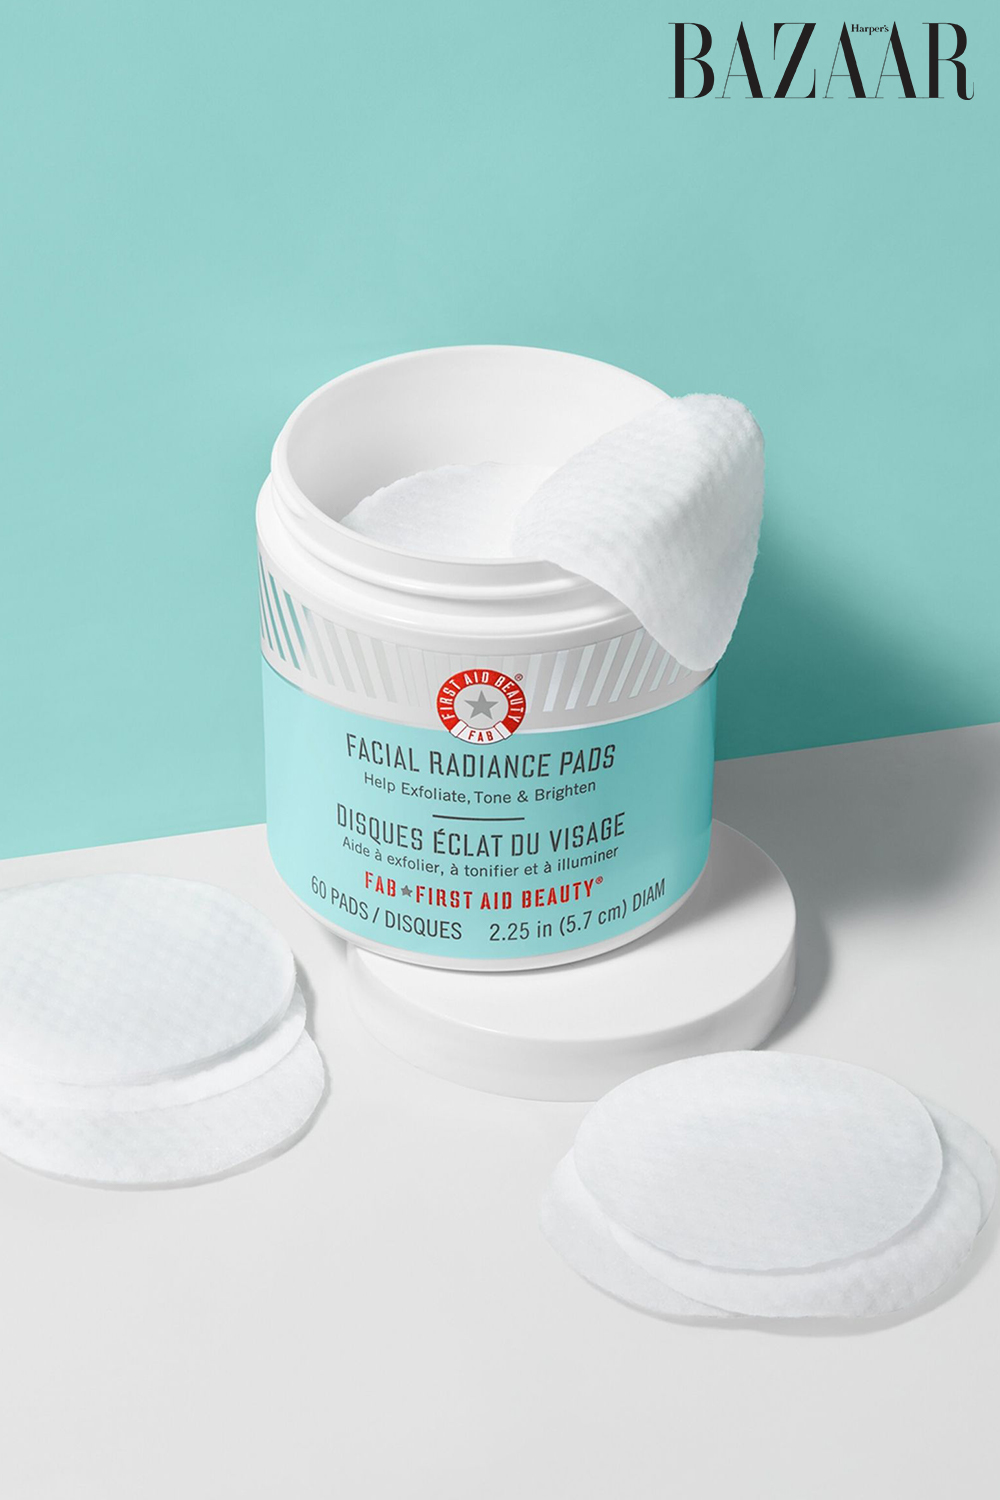 First Aid Beauty Facial Radiance Pads.